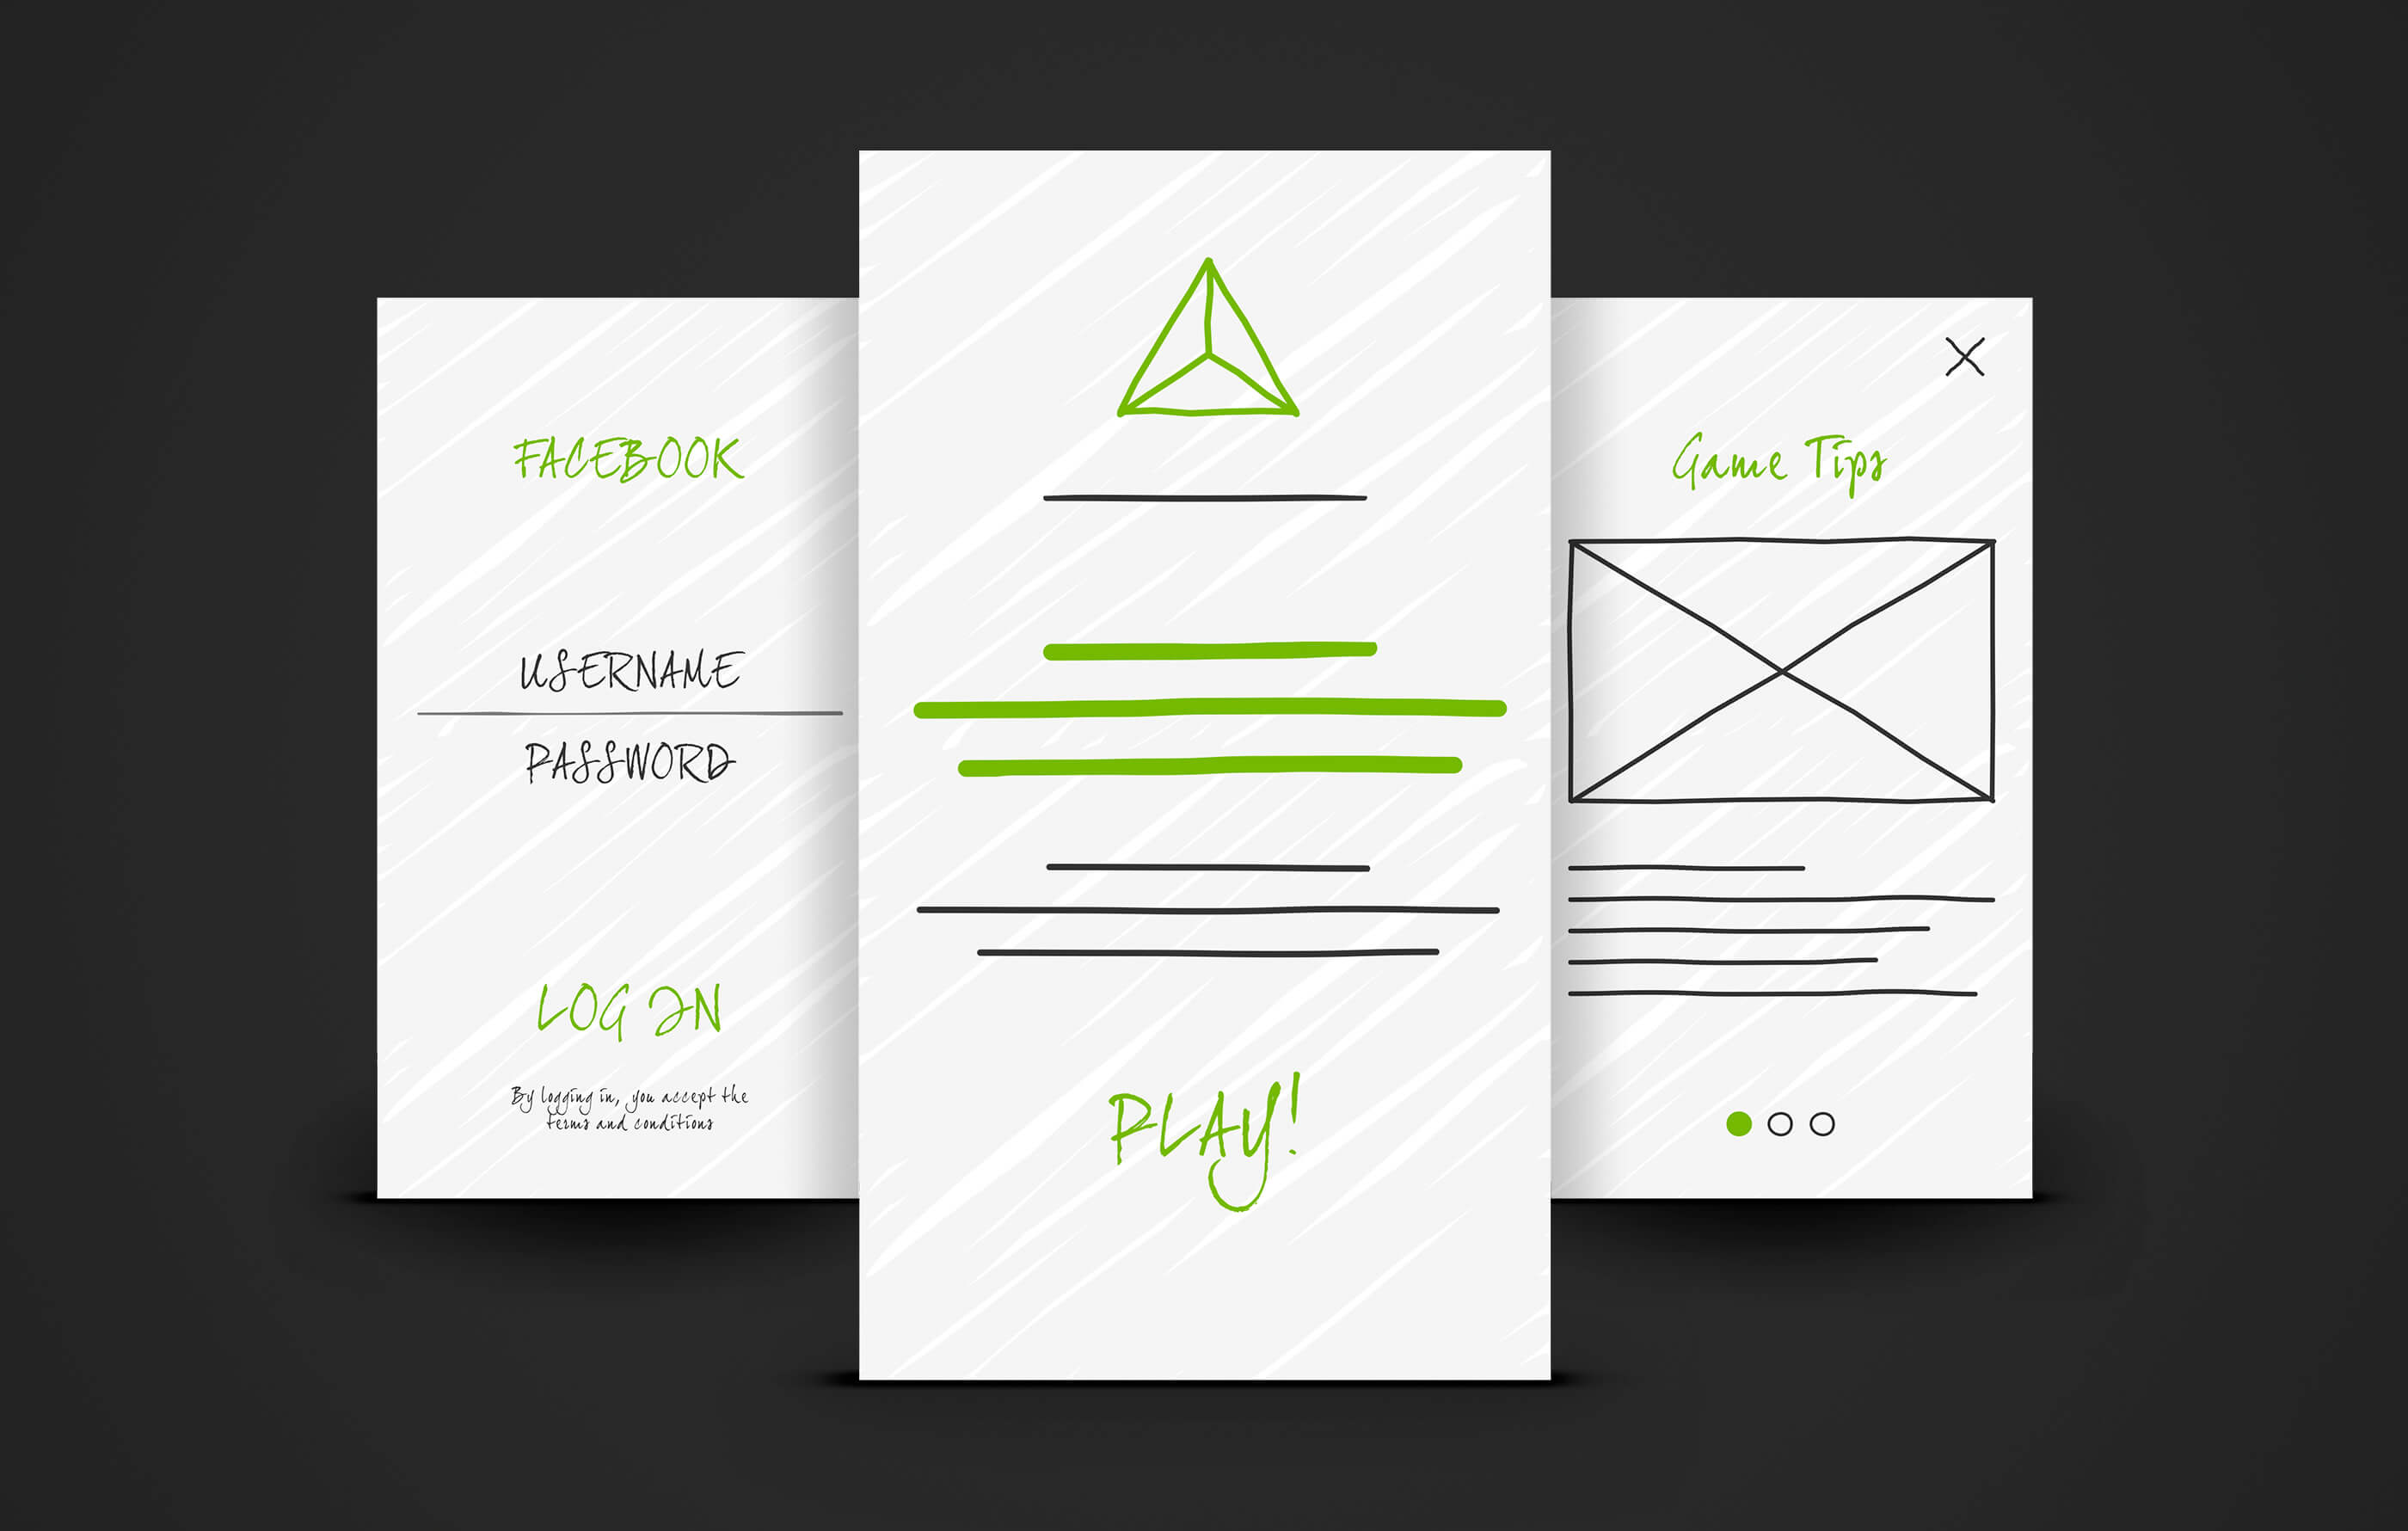 Three mobile app wirefame designs on a dark background, with a focus on UX user experience